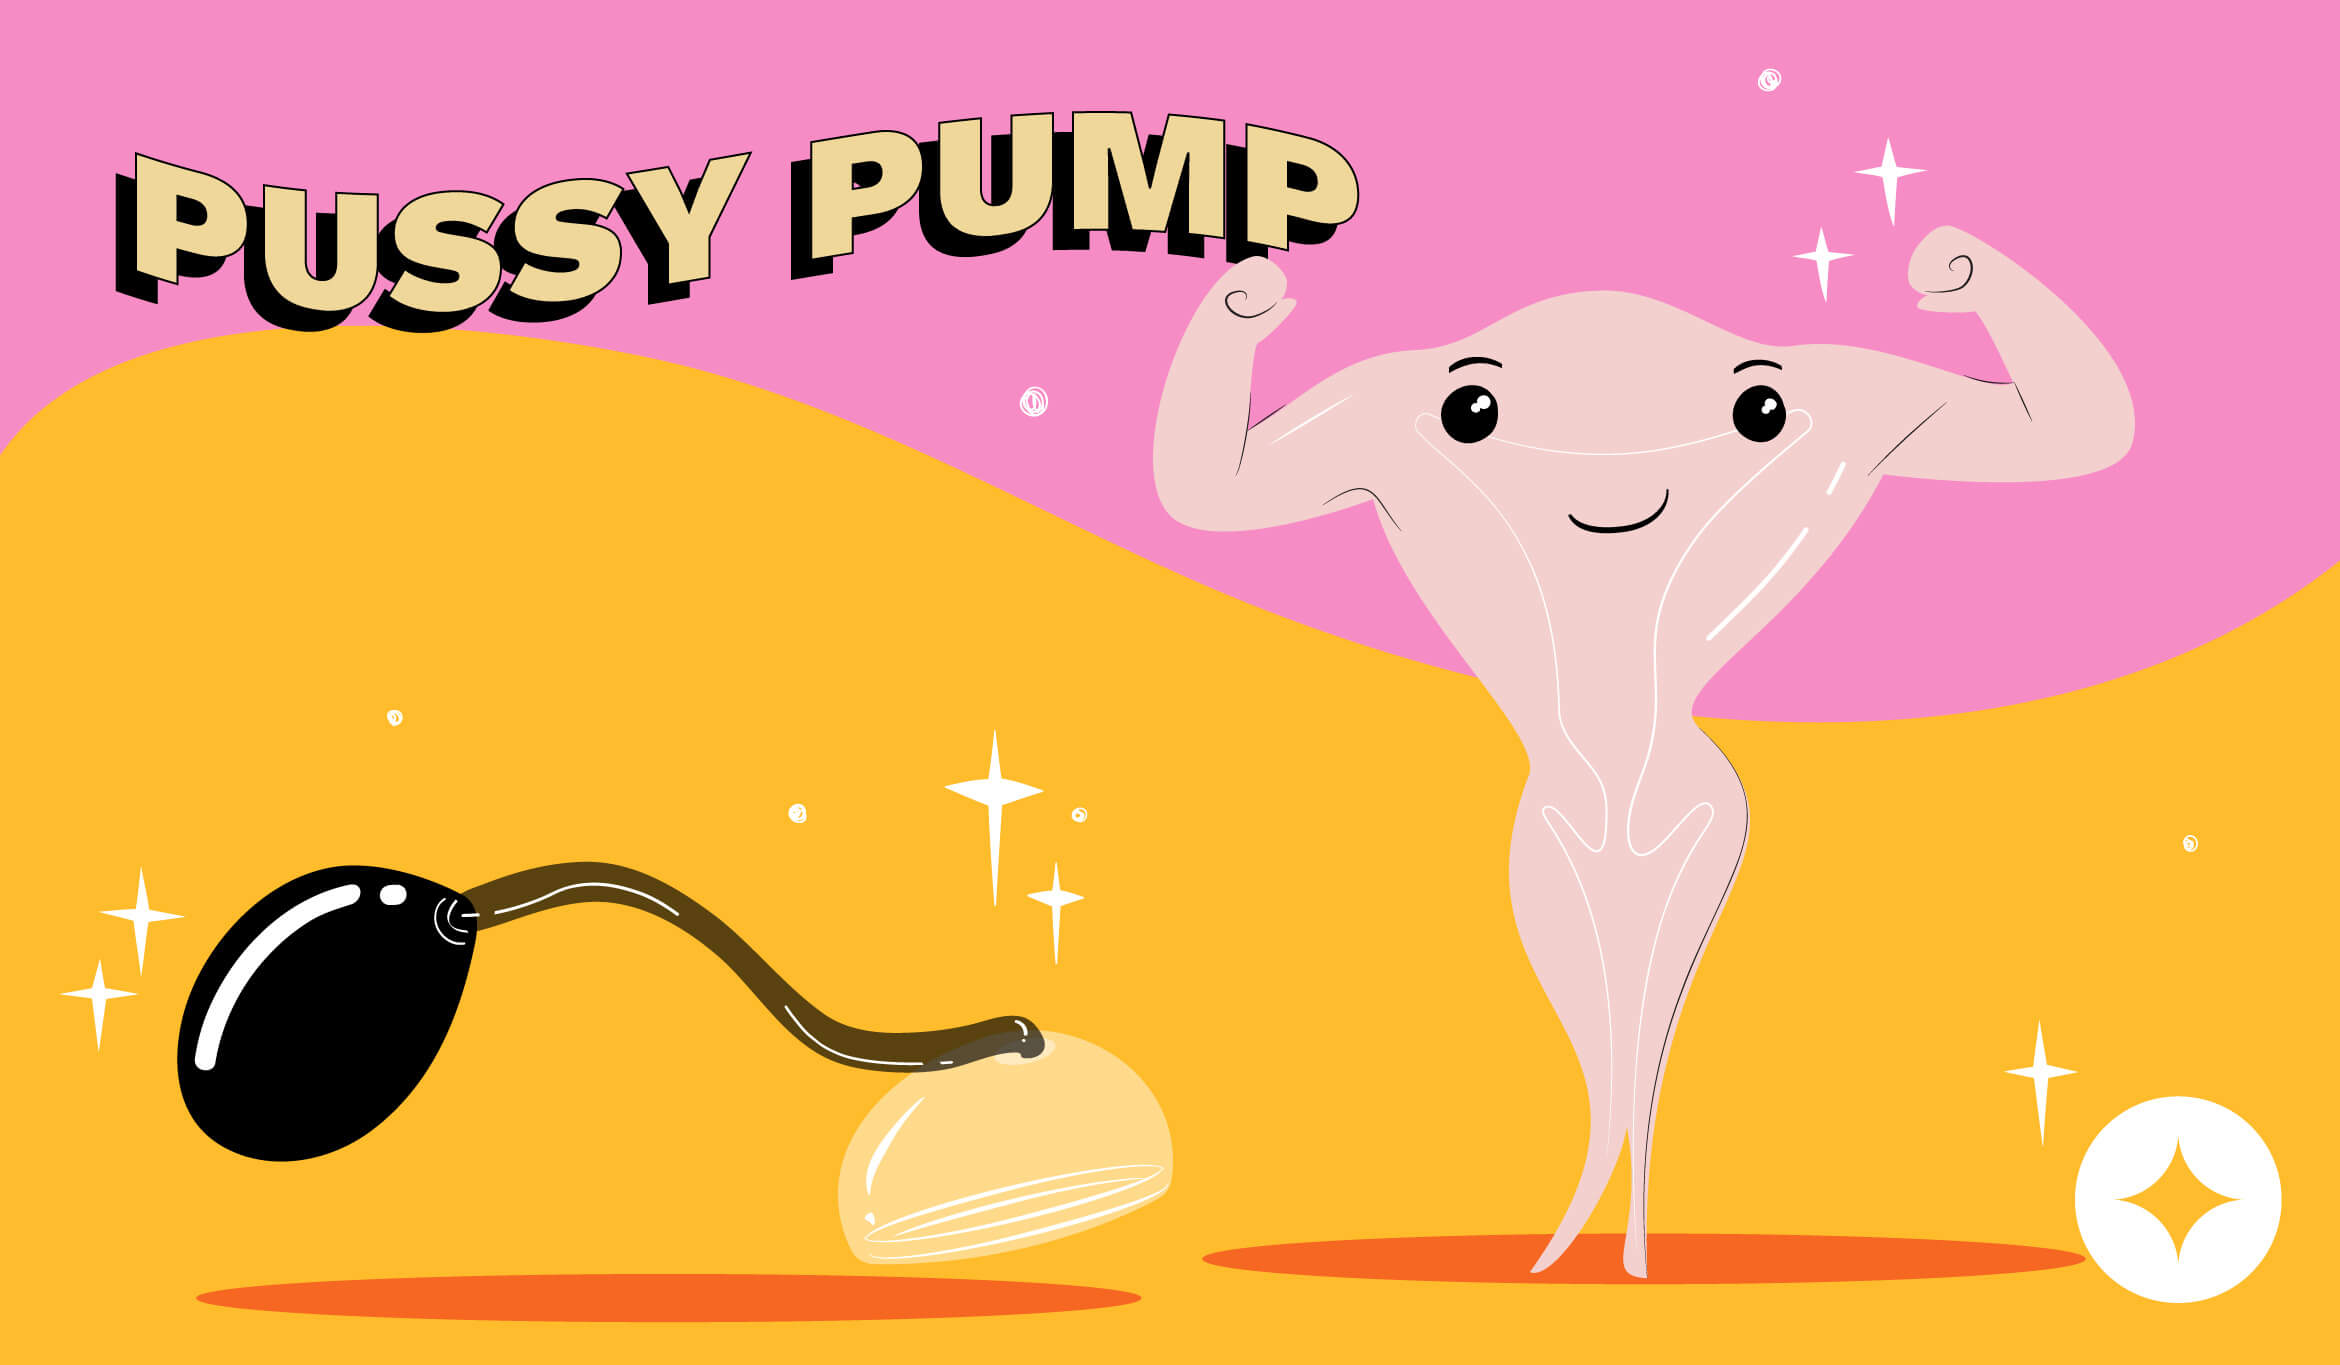 Pussy Pump Complete Guide to Pussy Pumping for Beginners (NEW) pic